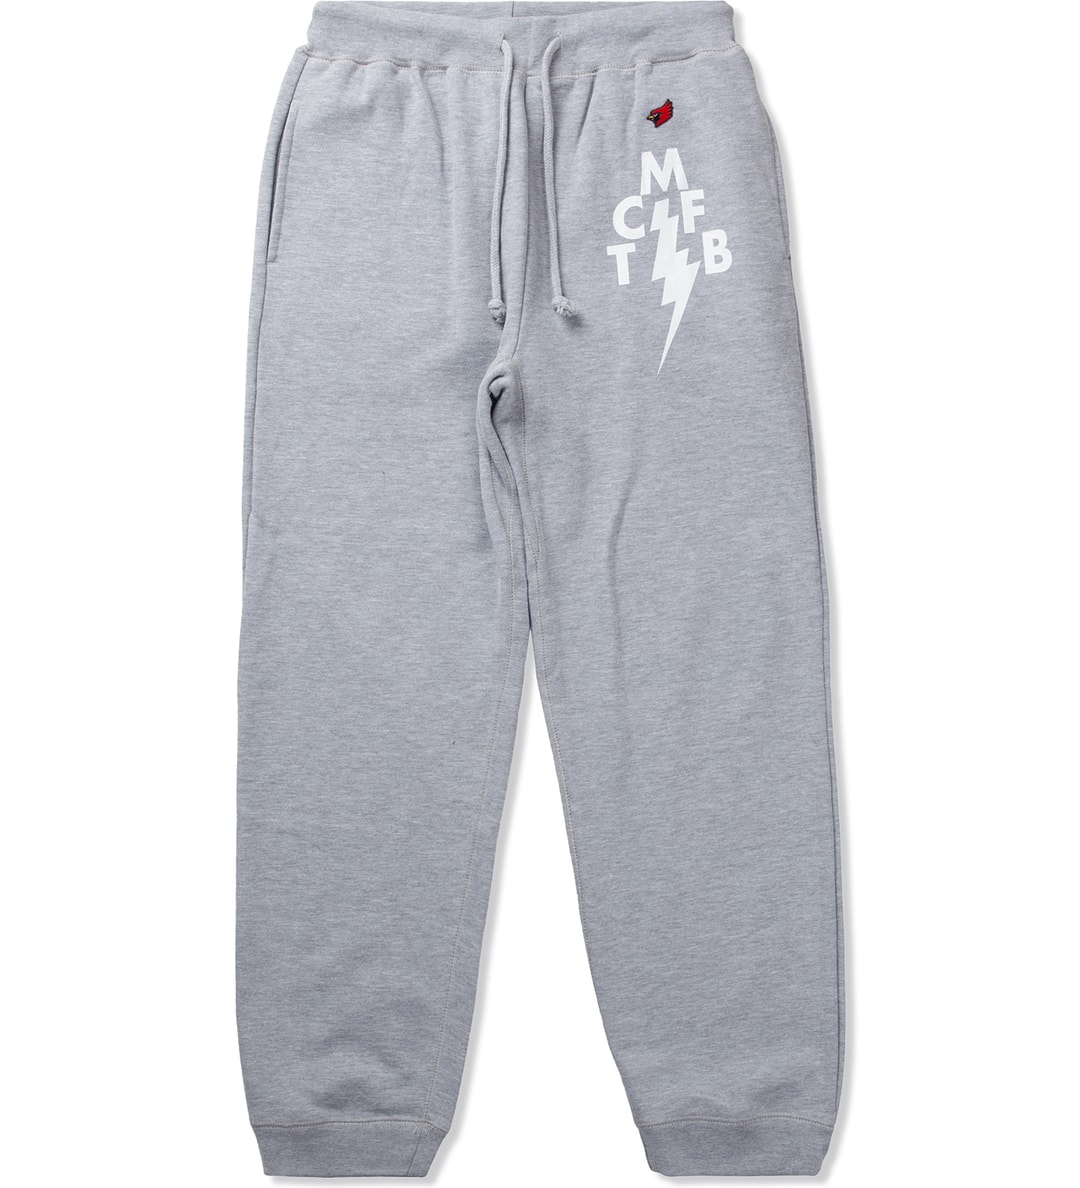 Mark McNairy for Heather Grey Wall - Heather Grey TCMFB Sweat Pant ...